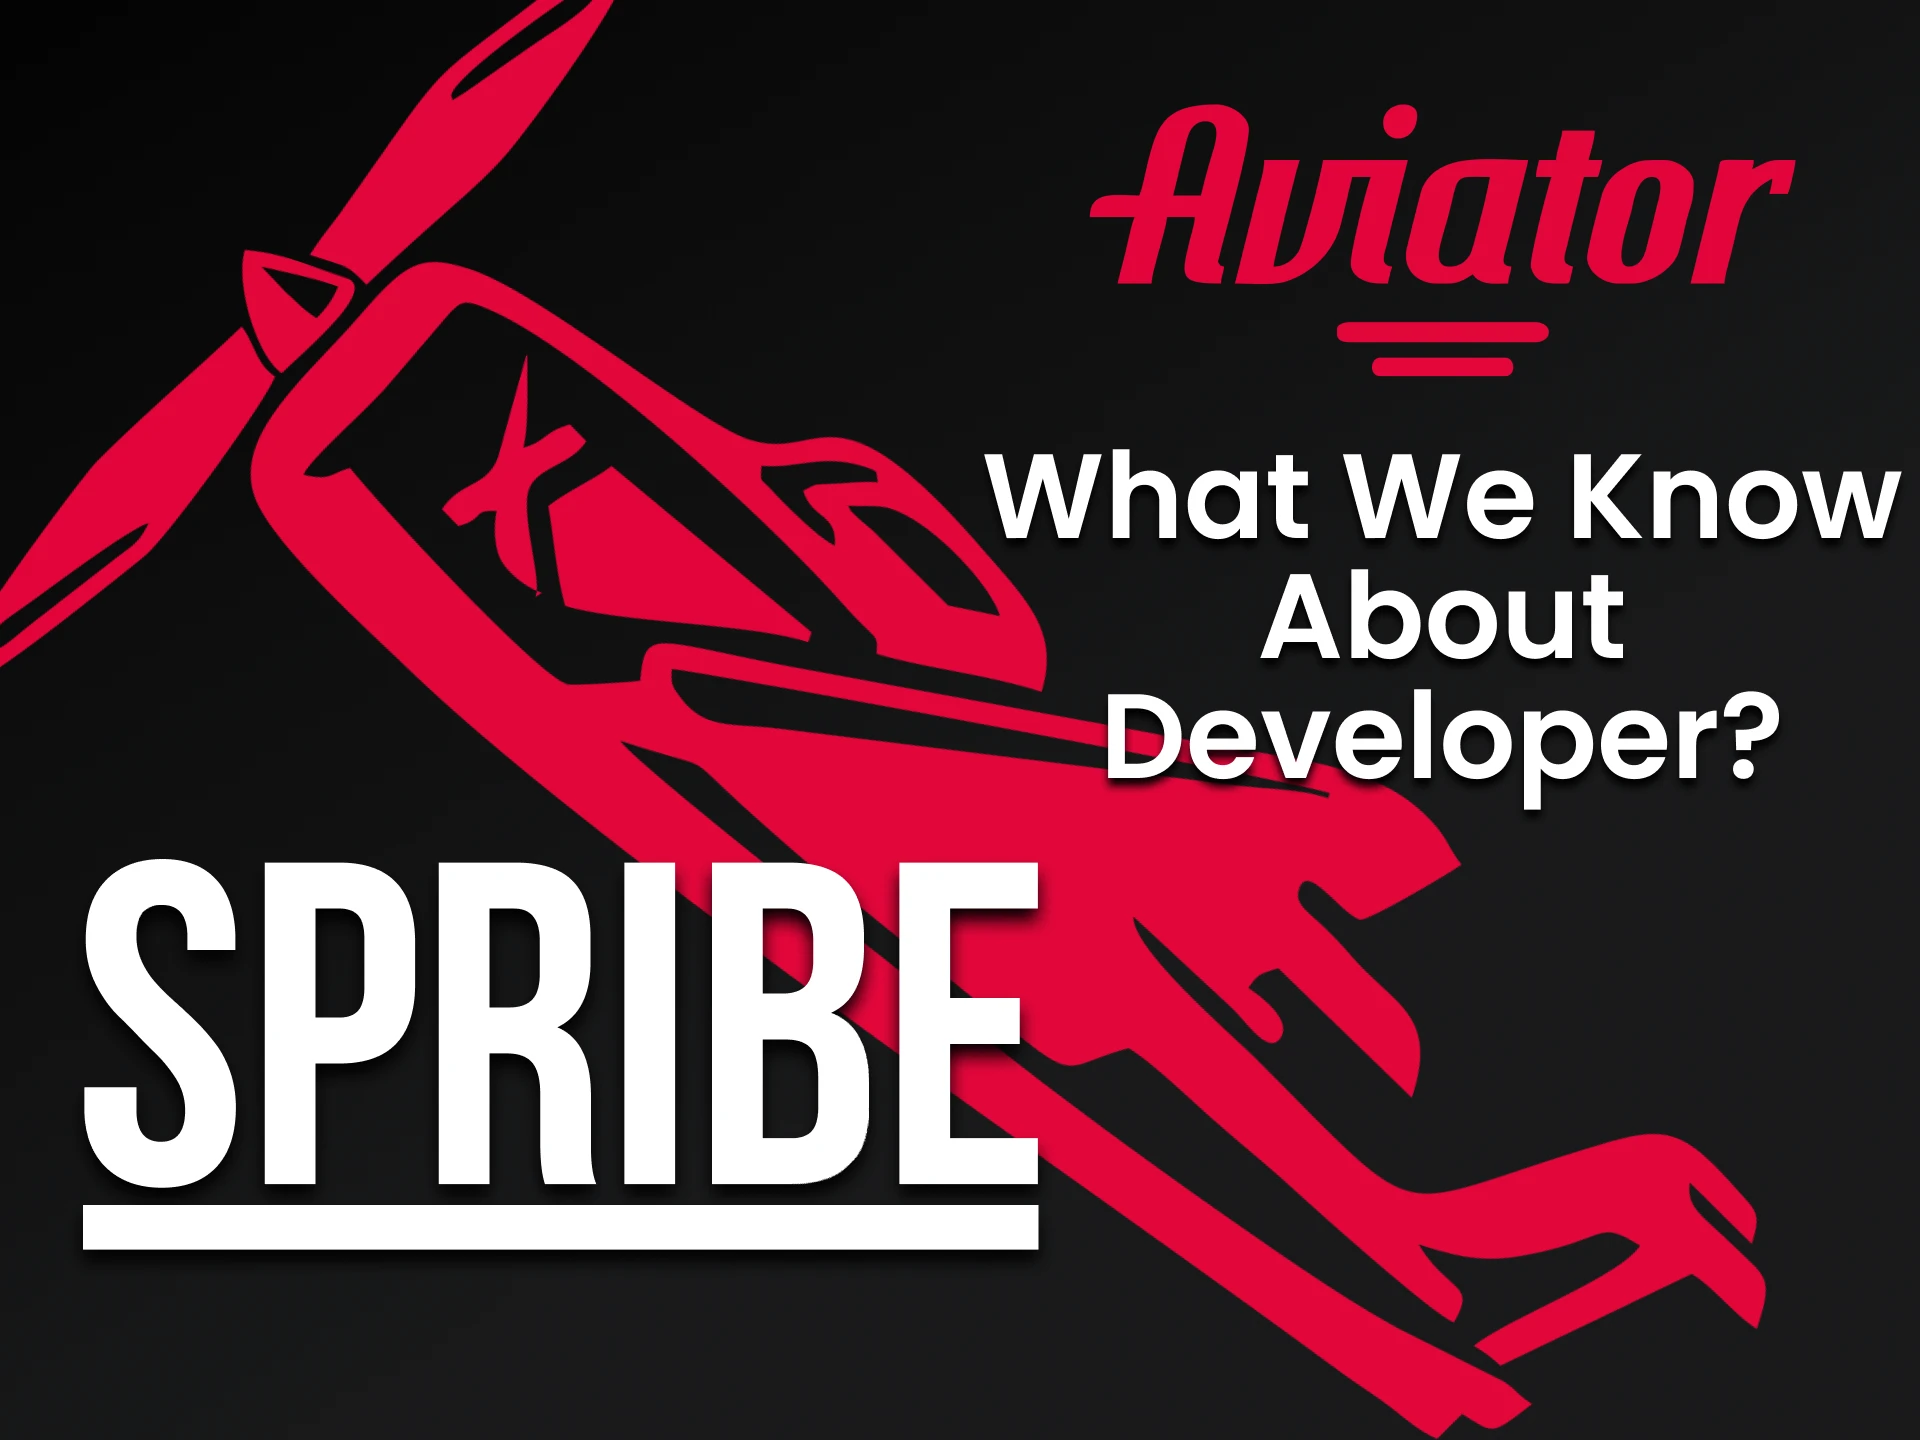 The developer of Aviator game is Spribe.